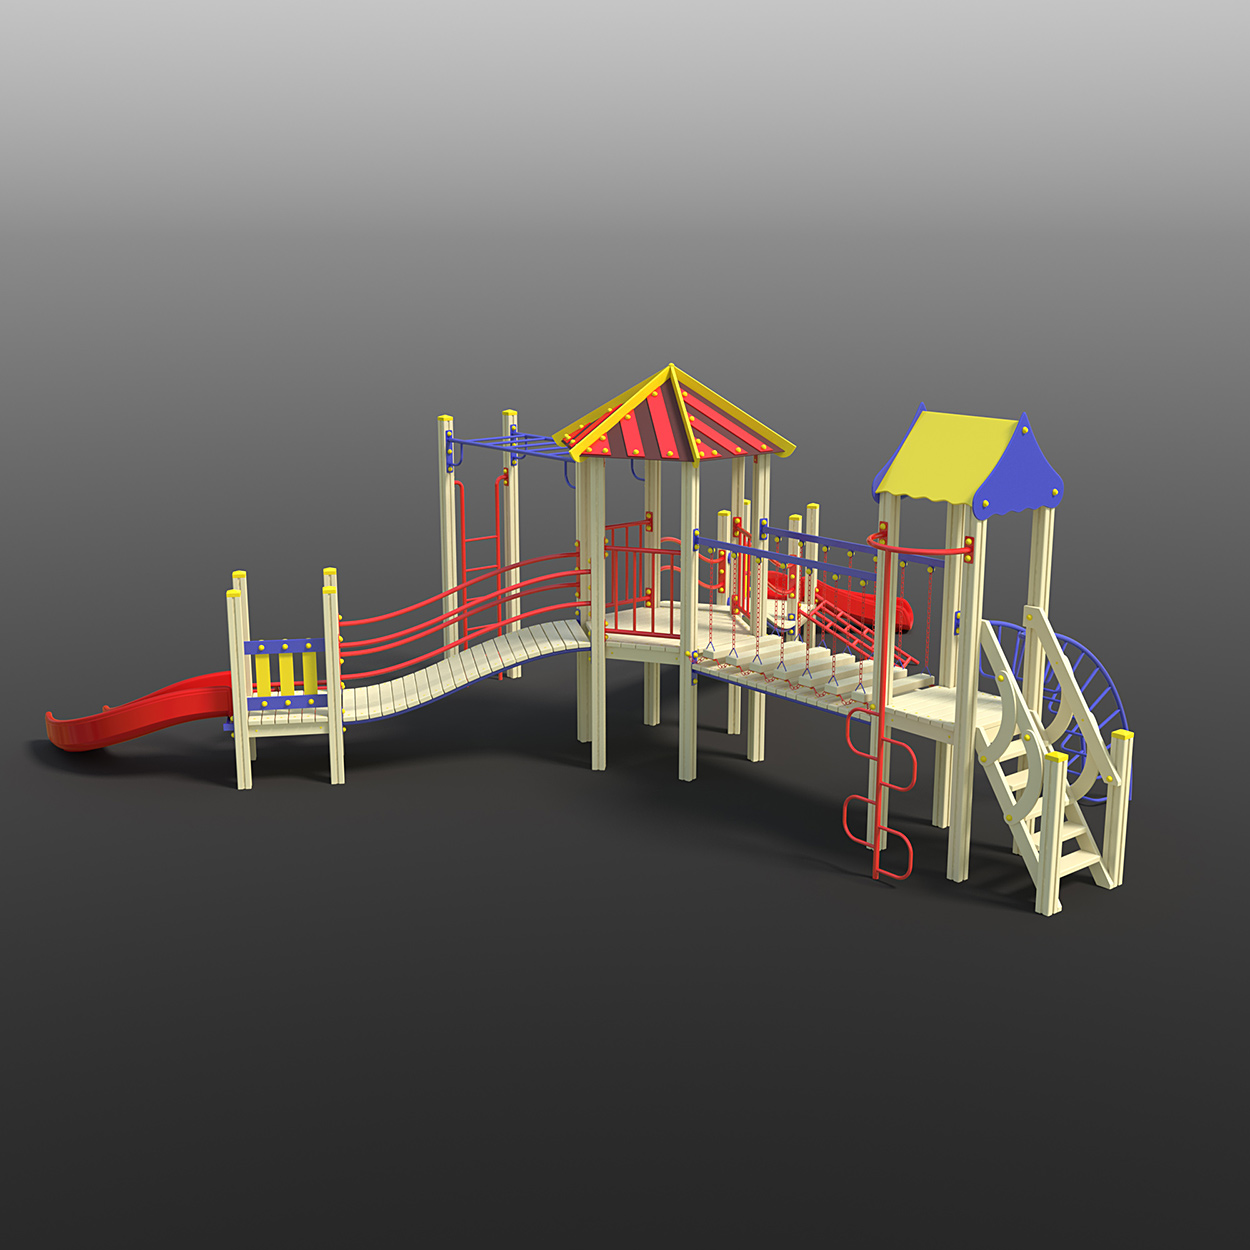 High quality 3D model of the Playground. 3D model for sale.